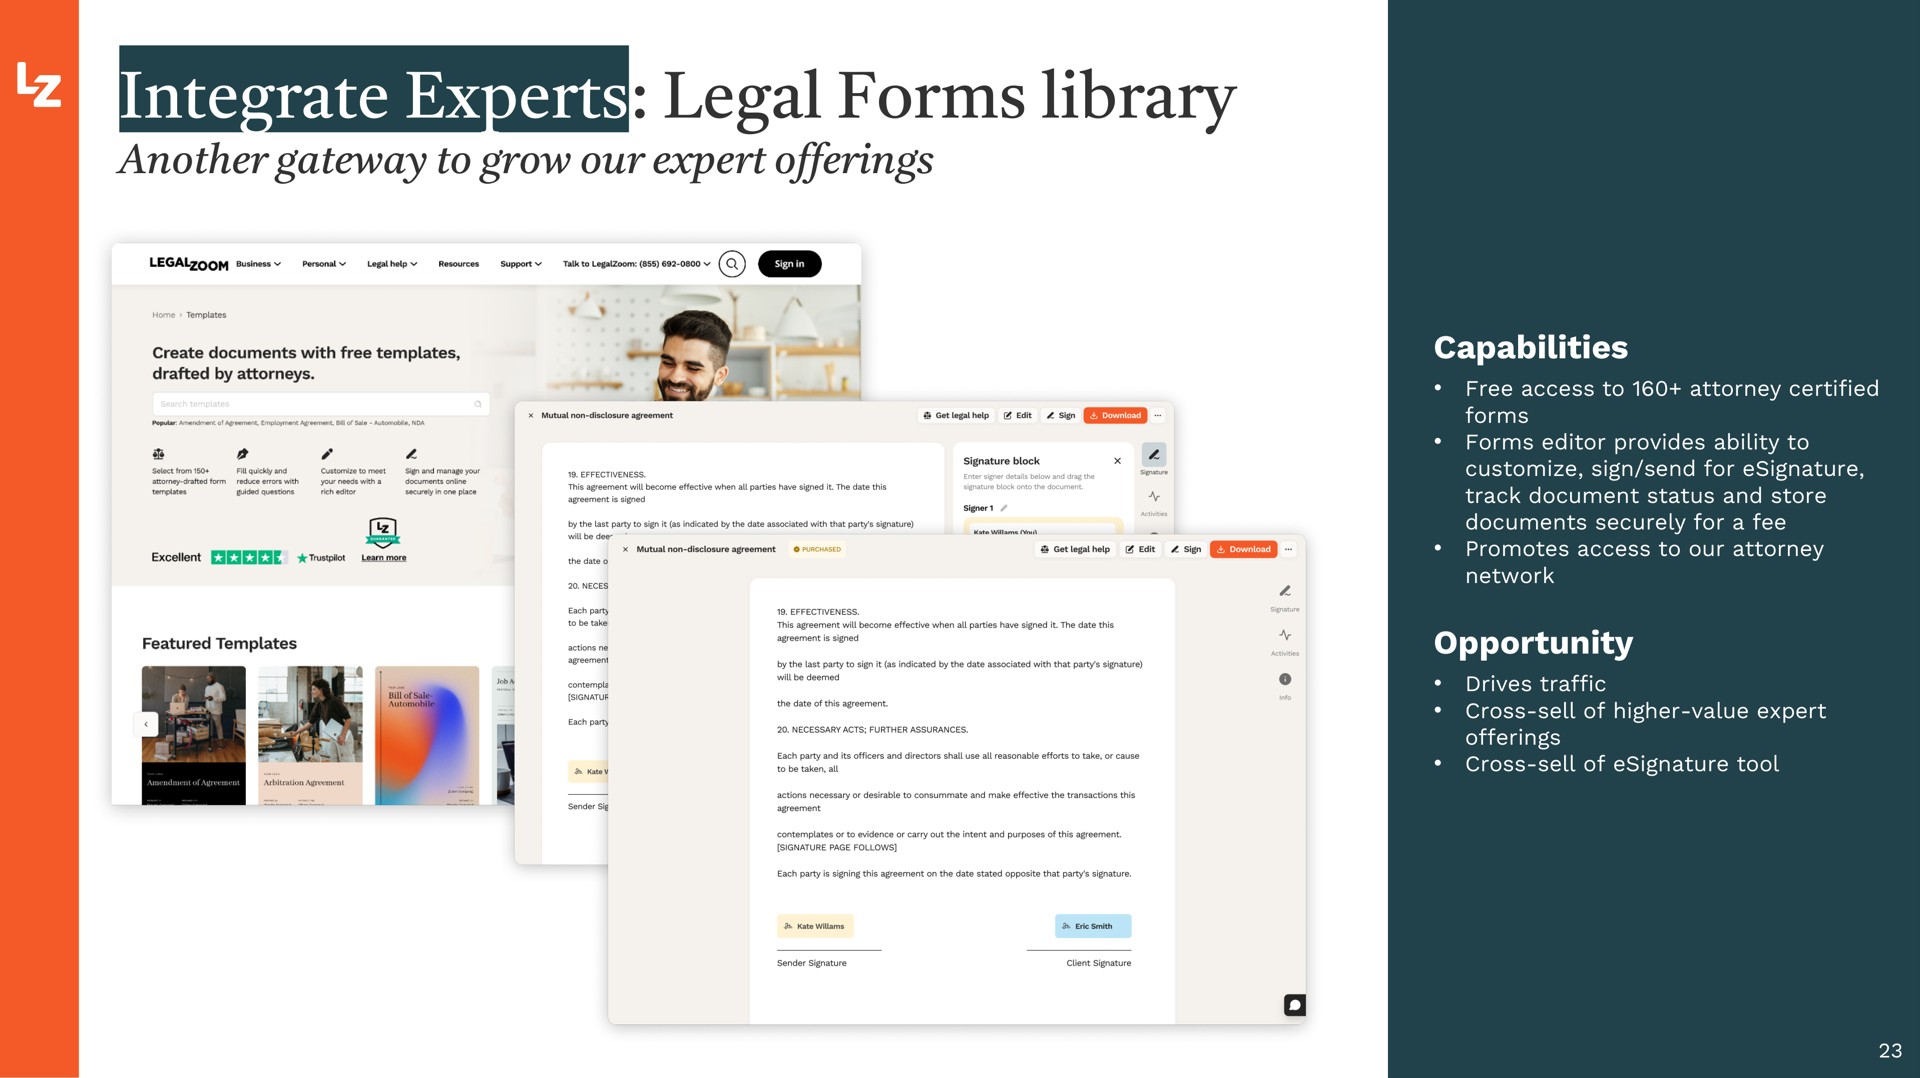 integrate experts legal forms library | LegalZoom.com